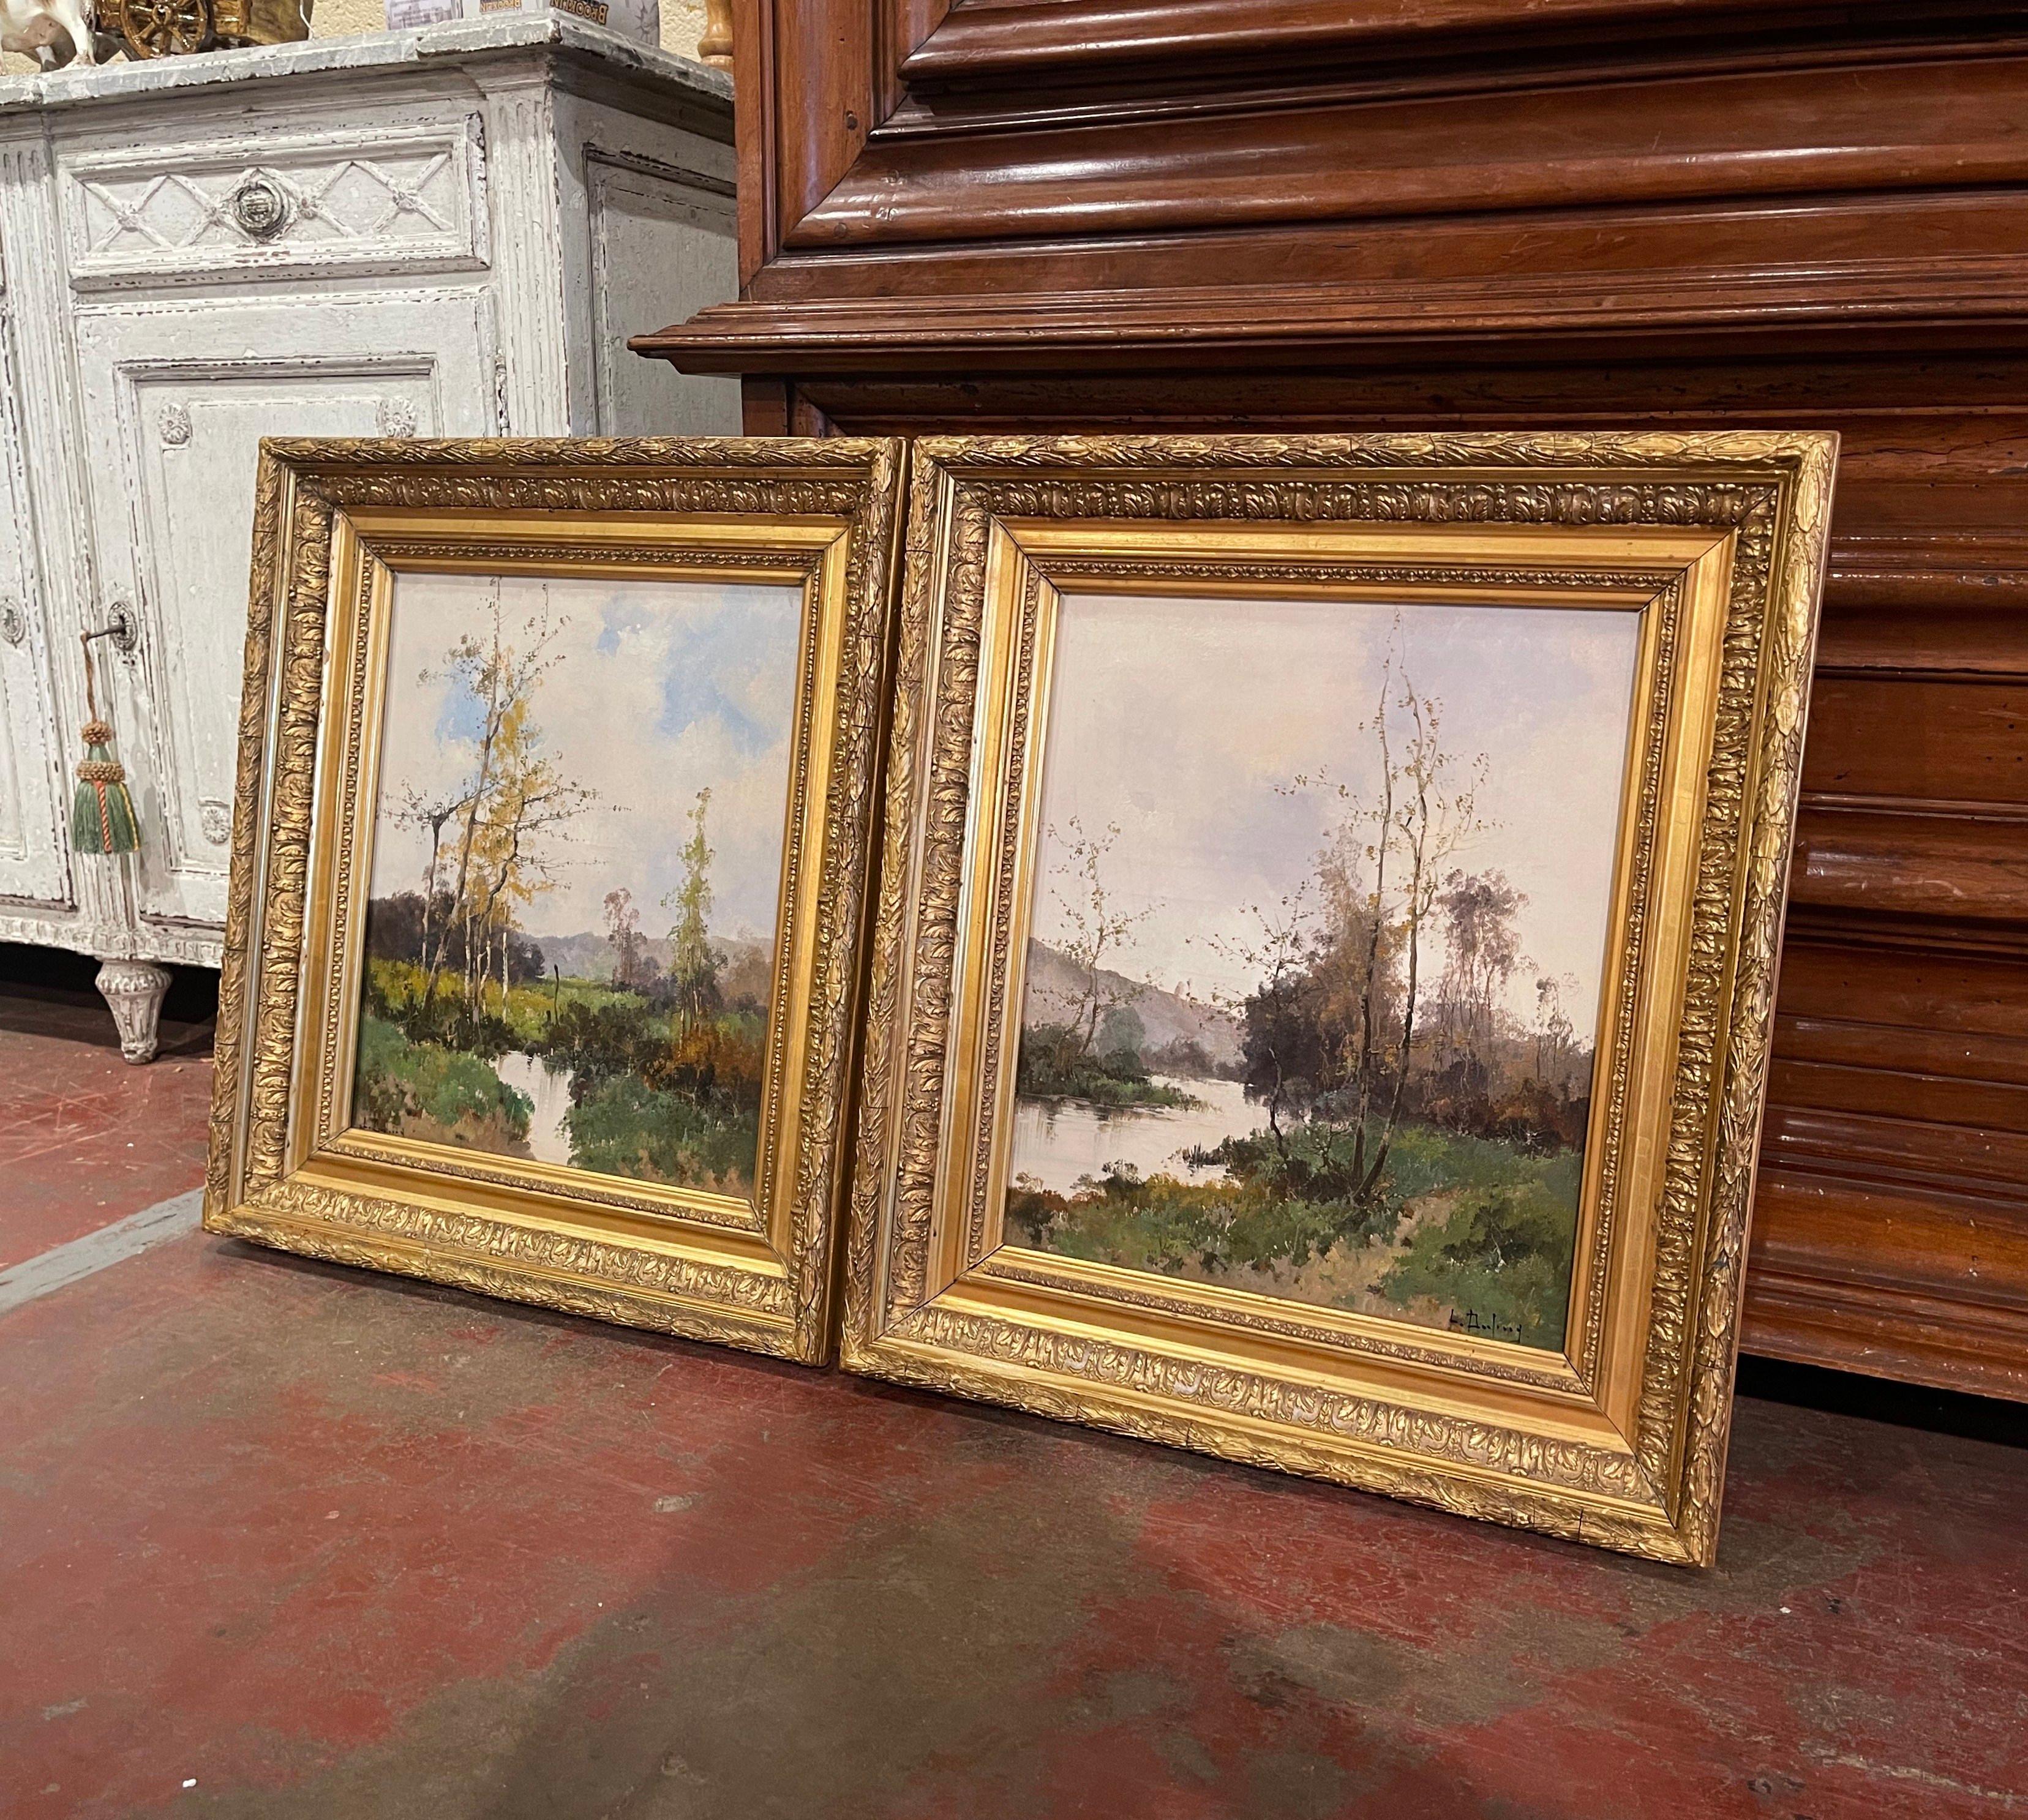 Decorate a study, living room or den with this beautiful and colorful pair of antique paintings! Painted in France circa 1890, the artworks are set in the original carved gilt wood frames and illustrate picturesque, countryside scenes in rural